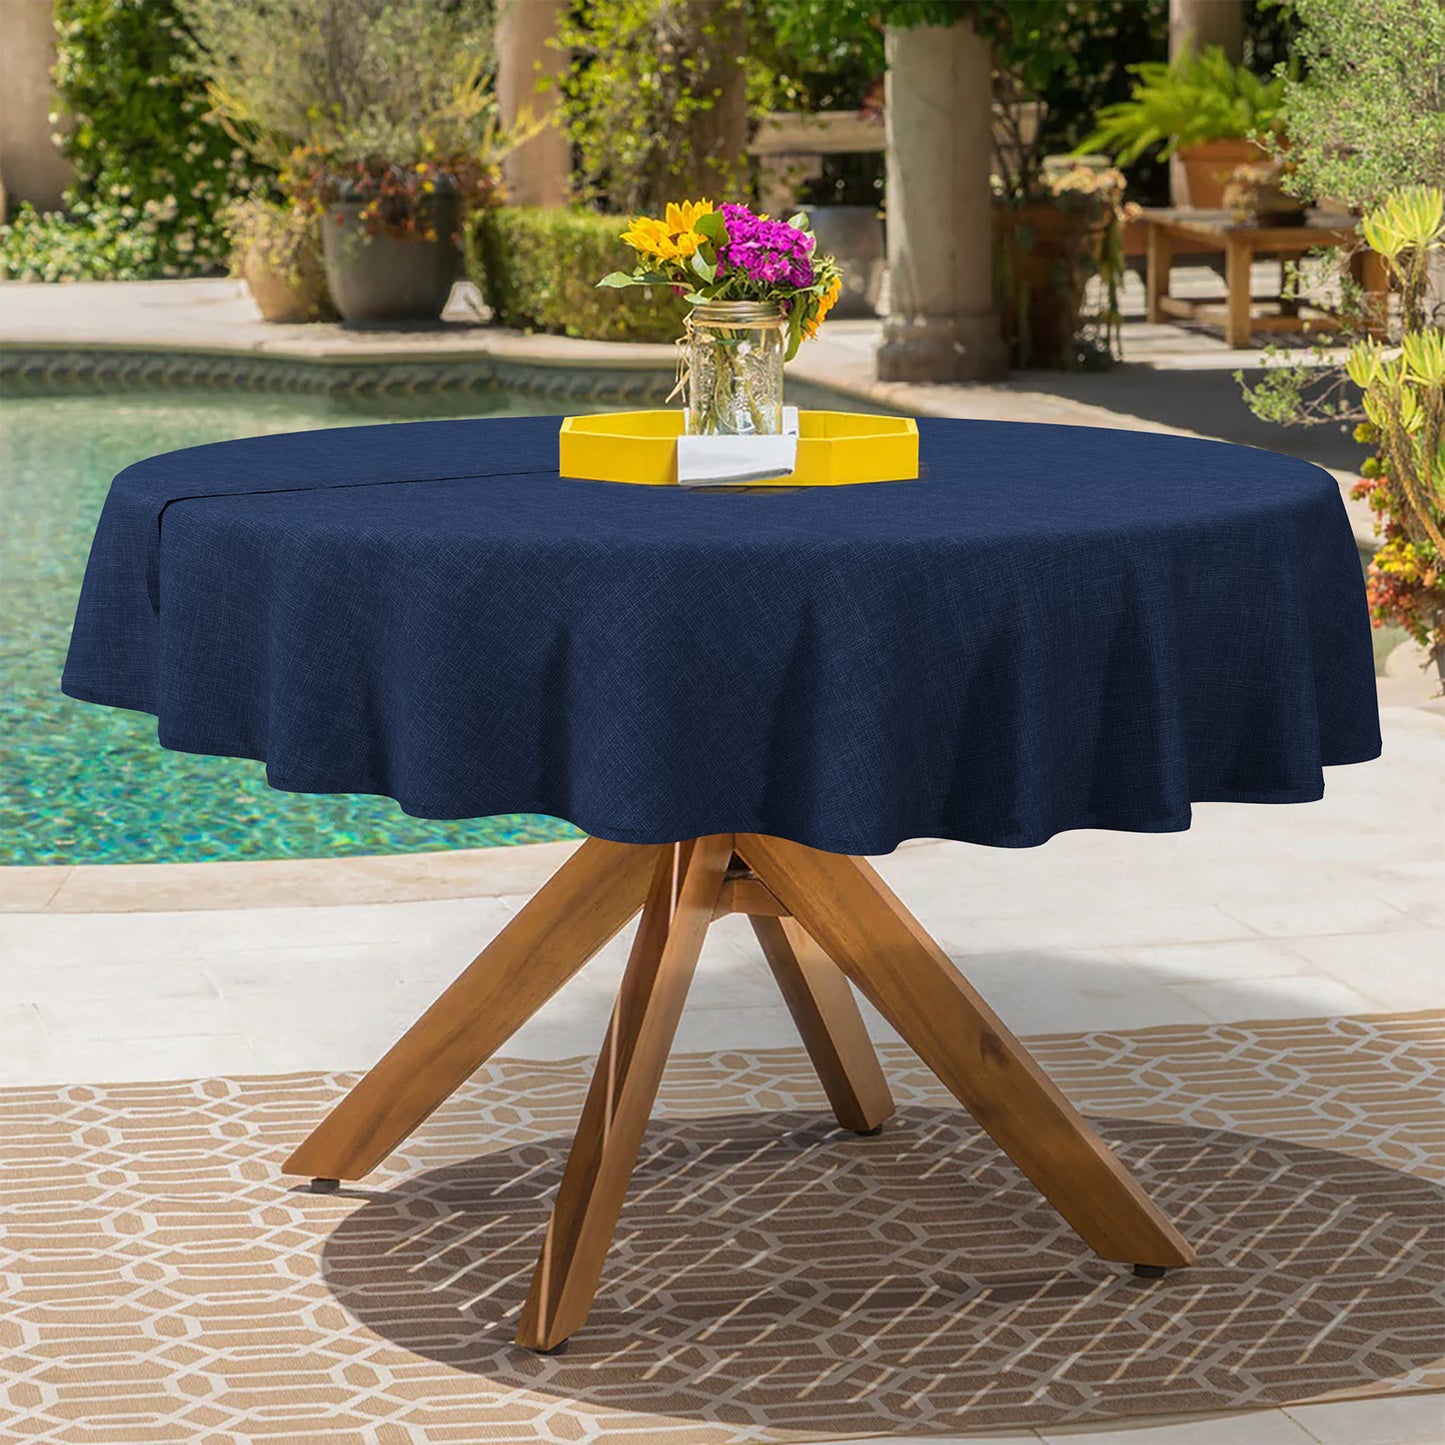 Melody Elephant Outdoor/Indoor Round Tablecloth with Umbrella Hole Zipper, Decorative Circular Table Cover for Home Garden, 60 Inch, Textured Navy